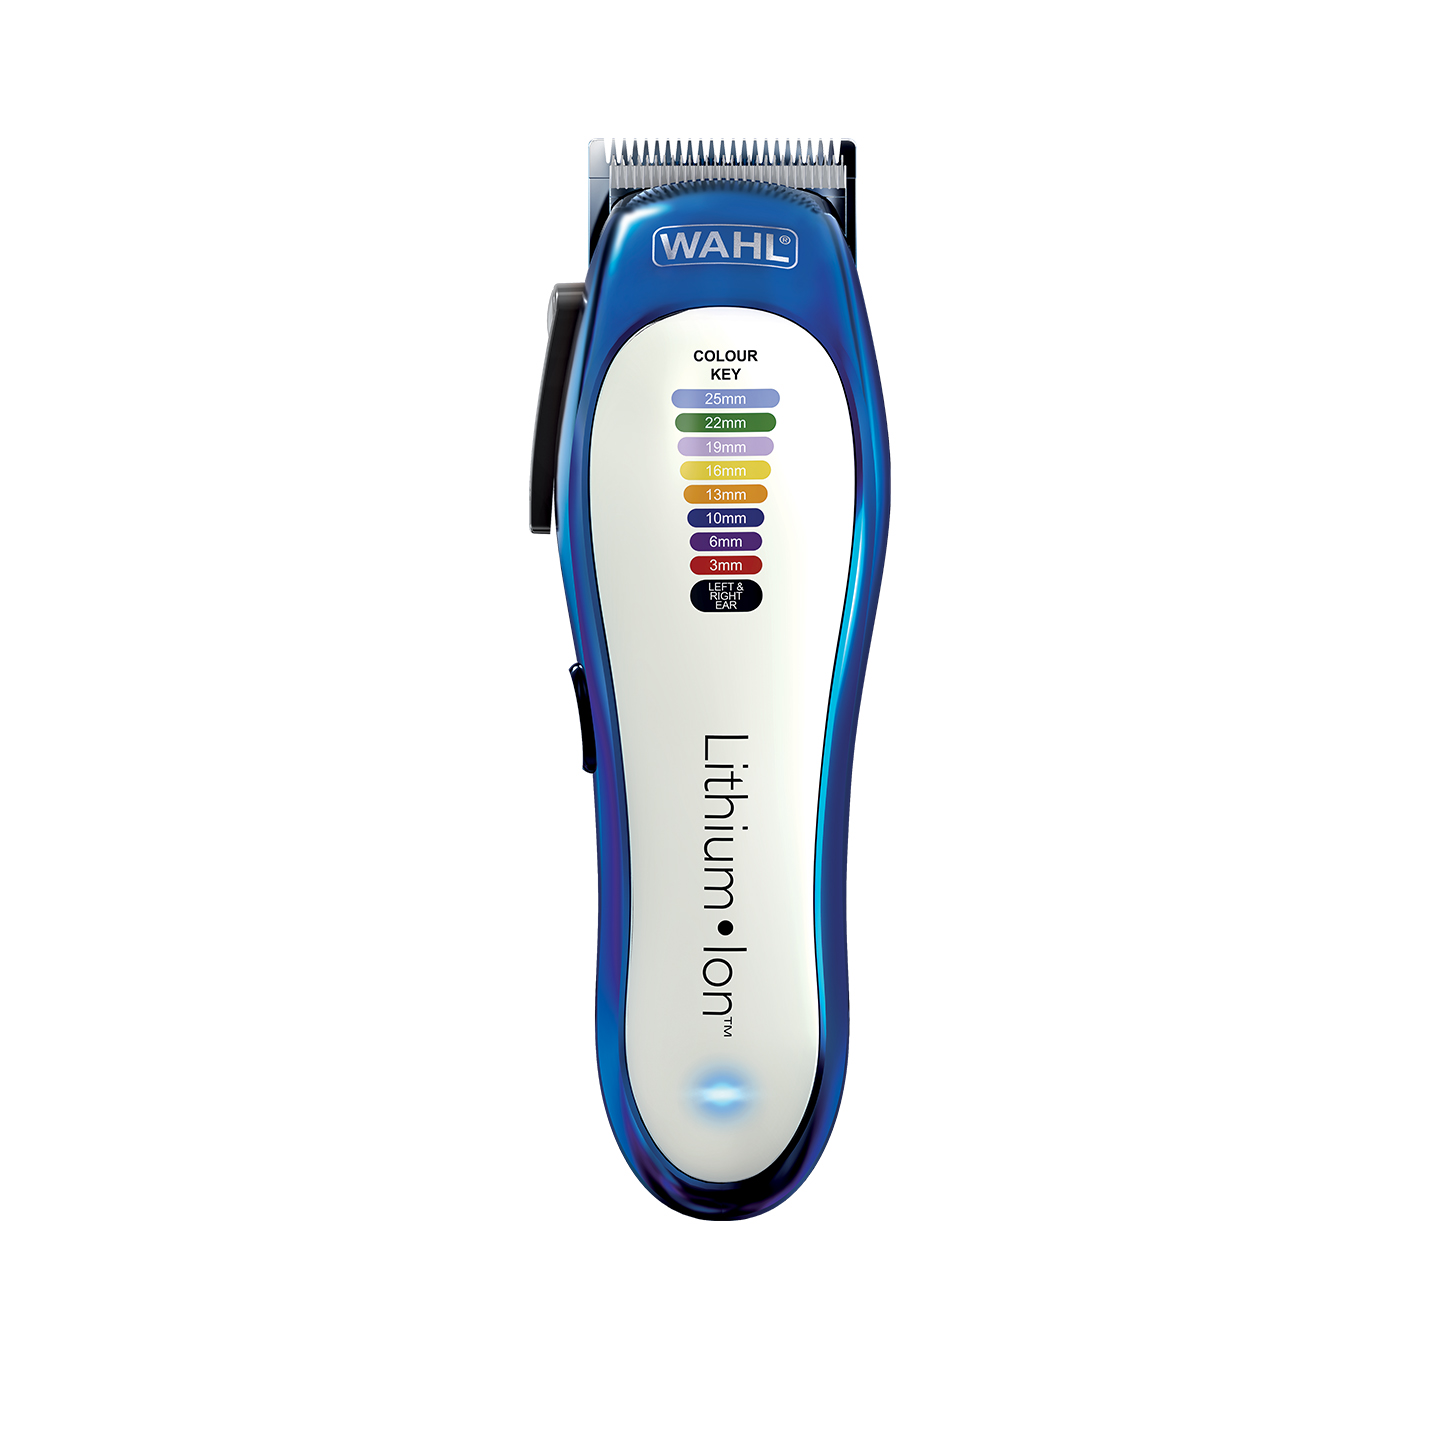 professional cordless hair clippers uk